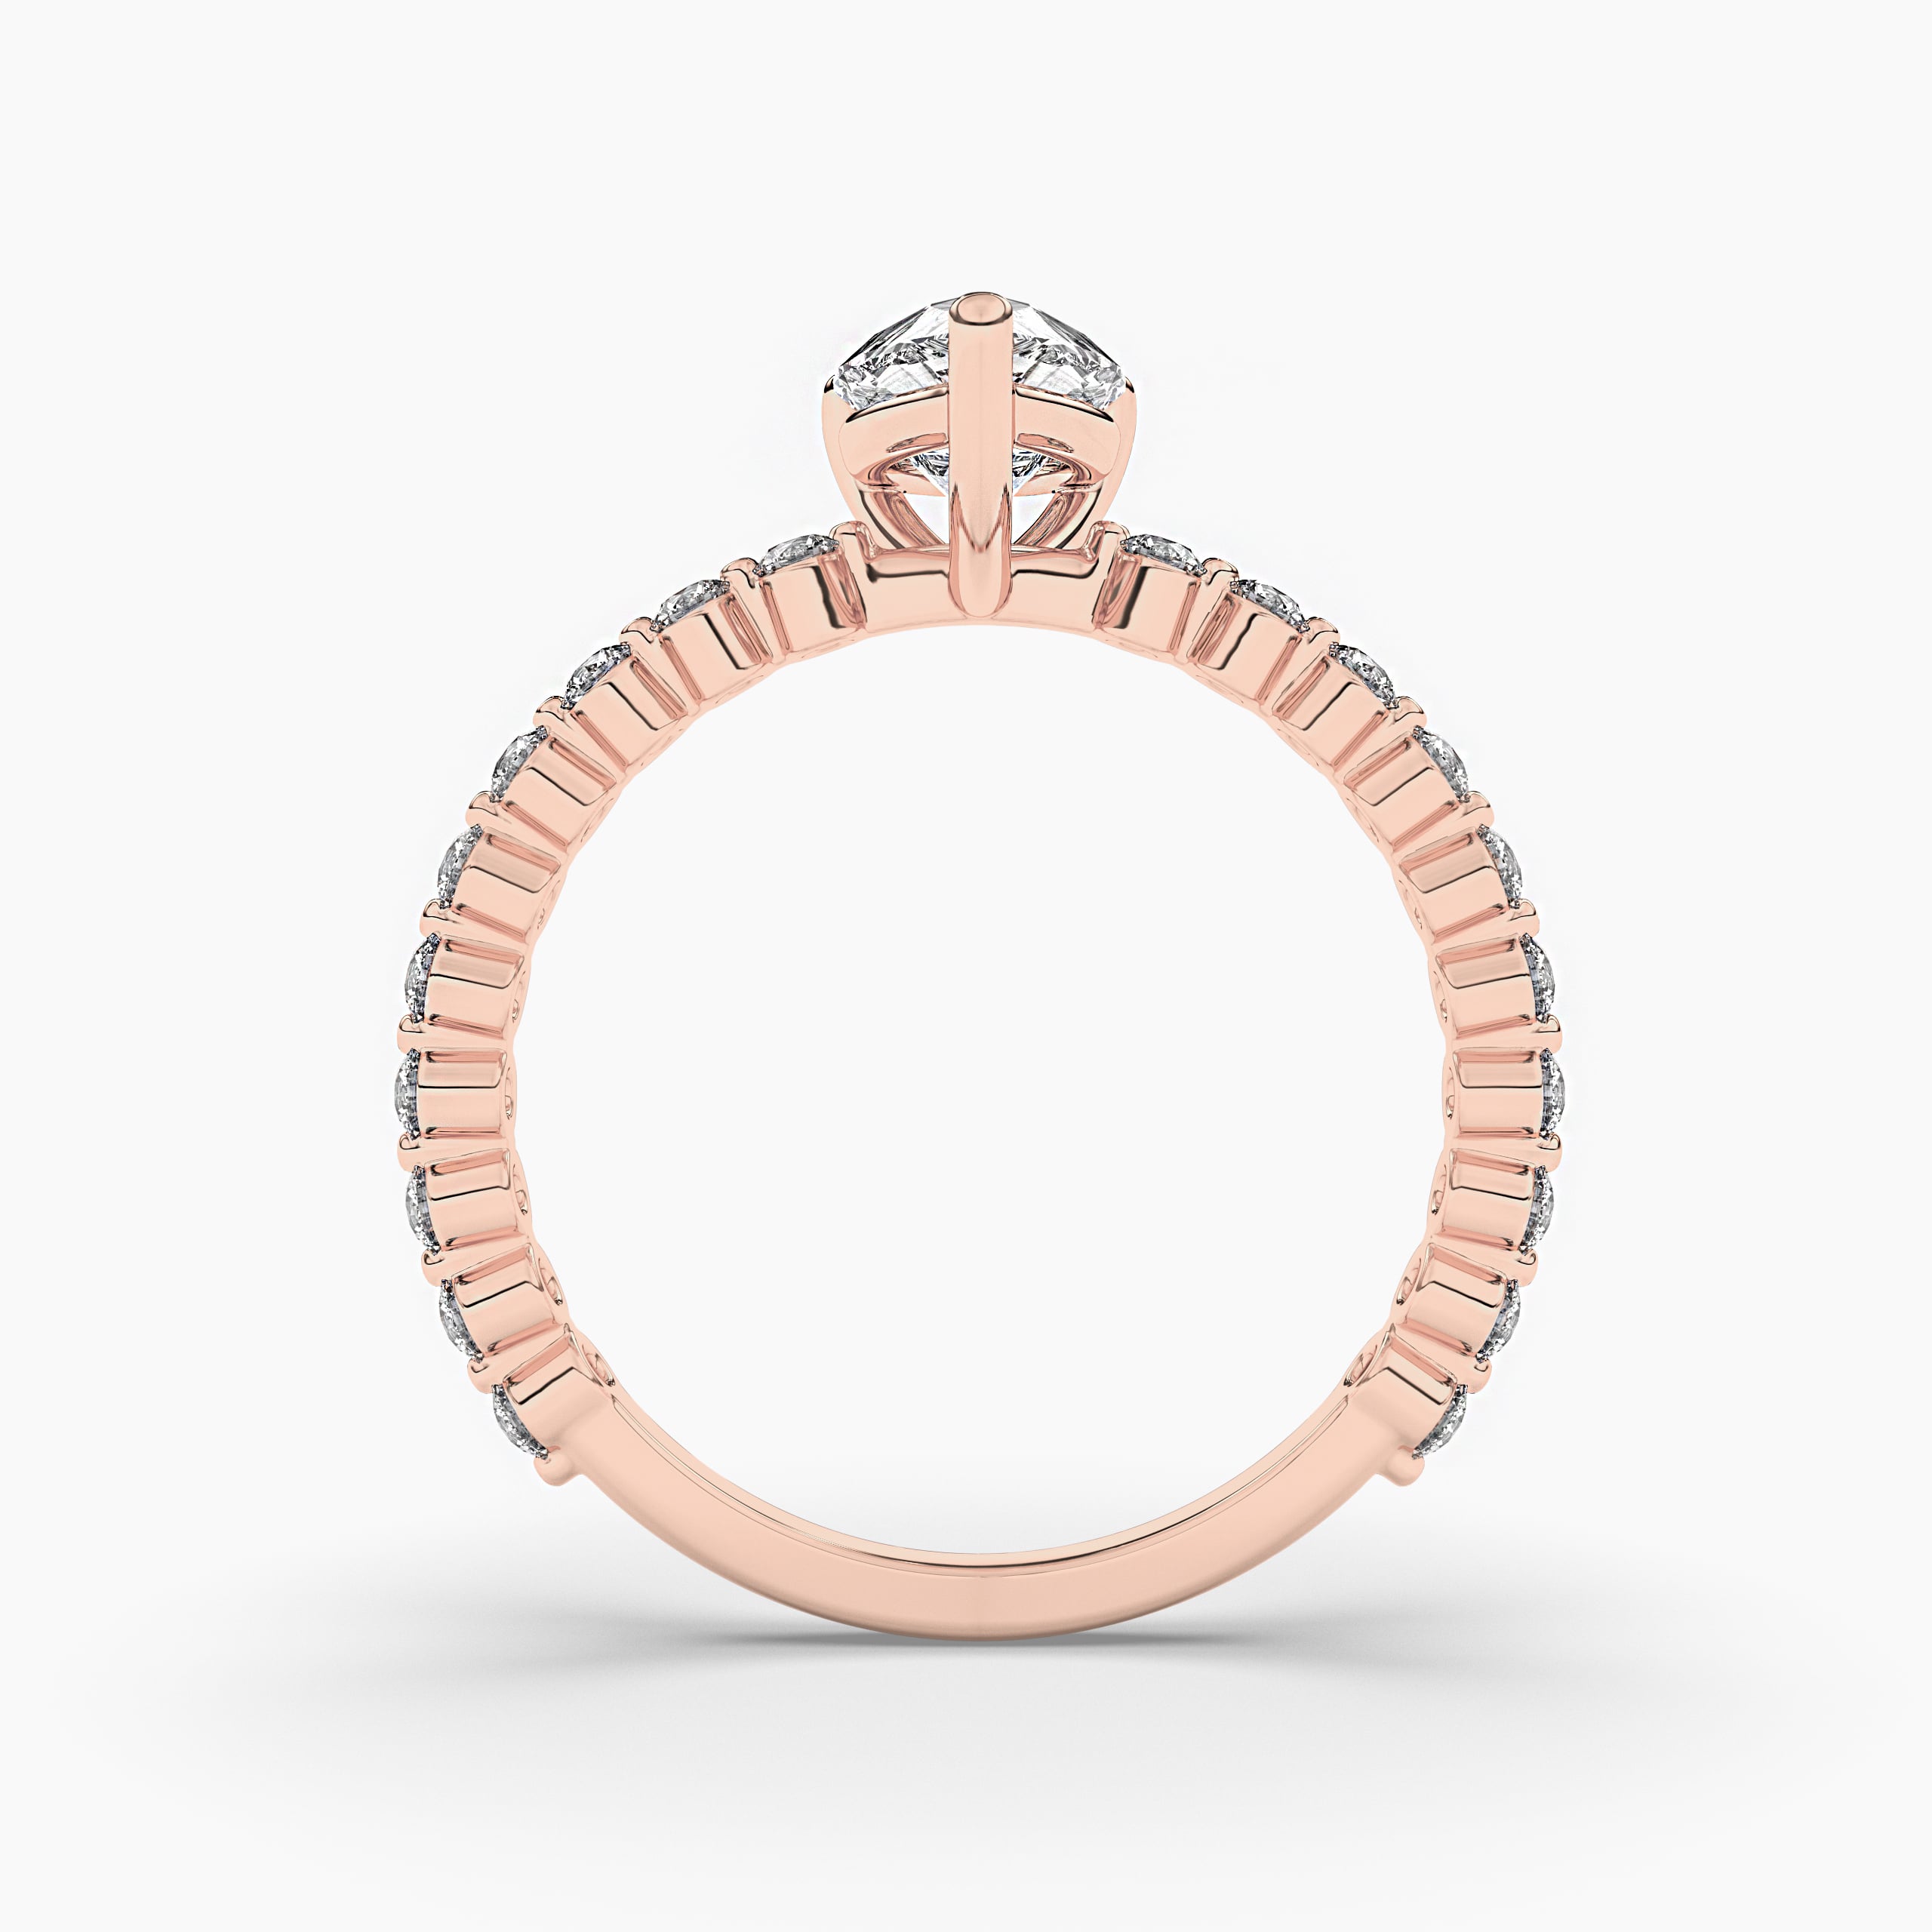  ROSE GOLD DIAMOND PEAR RING, PROMISE RING, WITH SIDE STONES